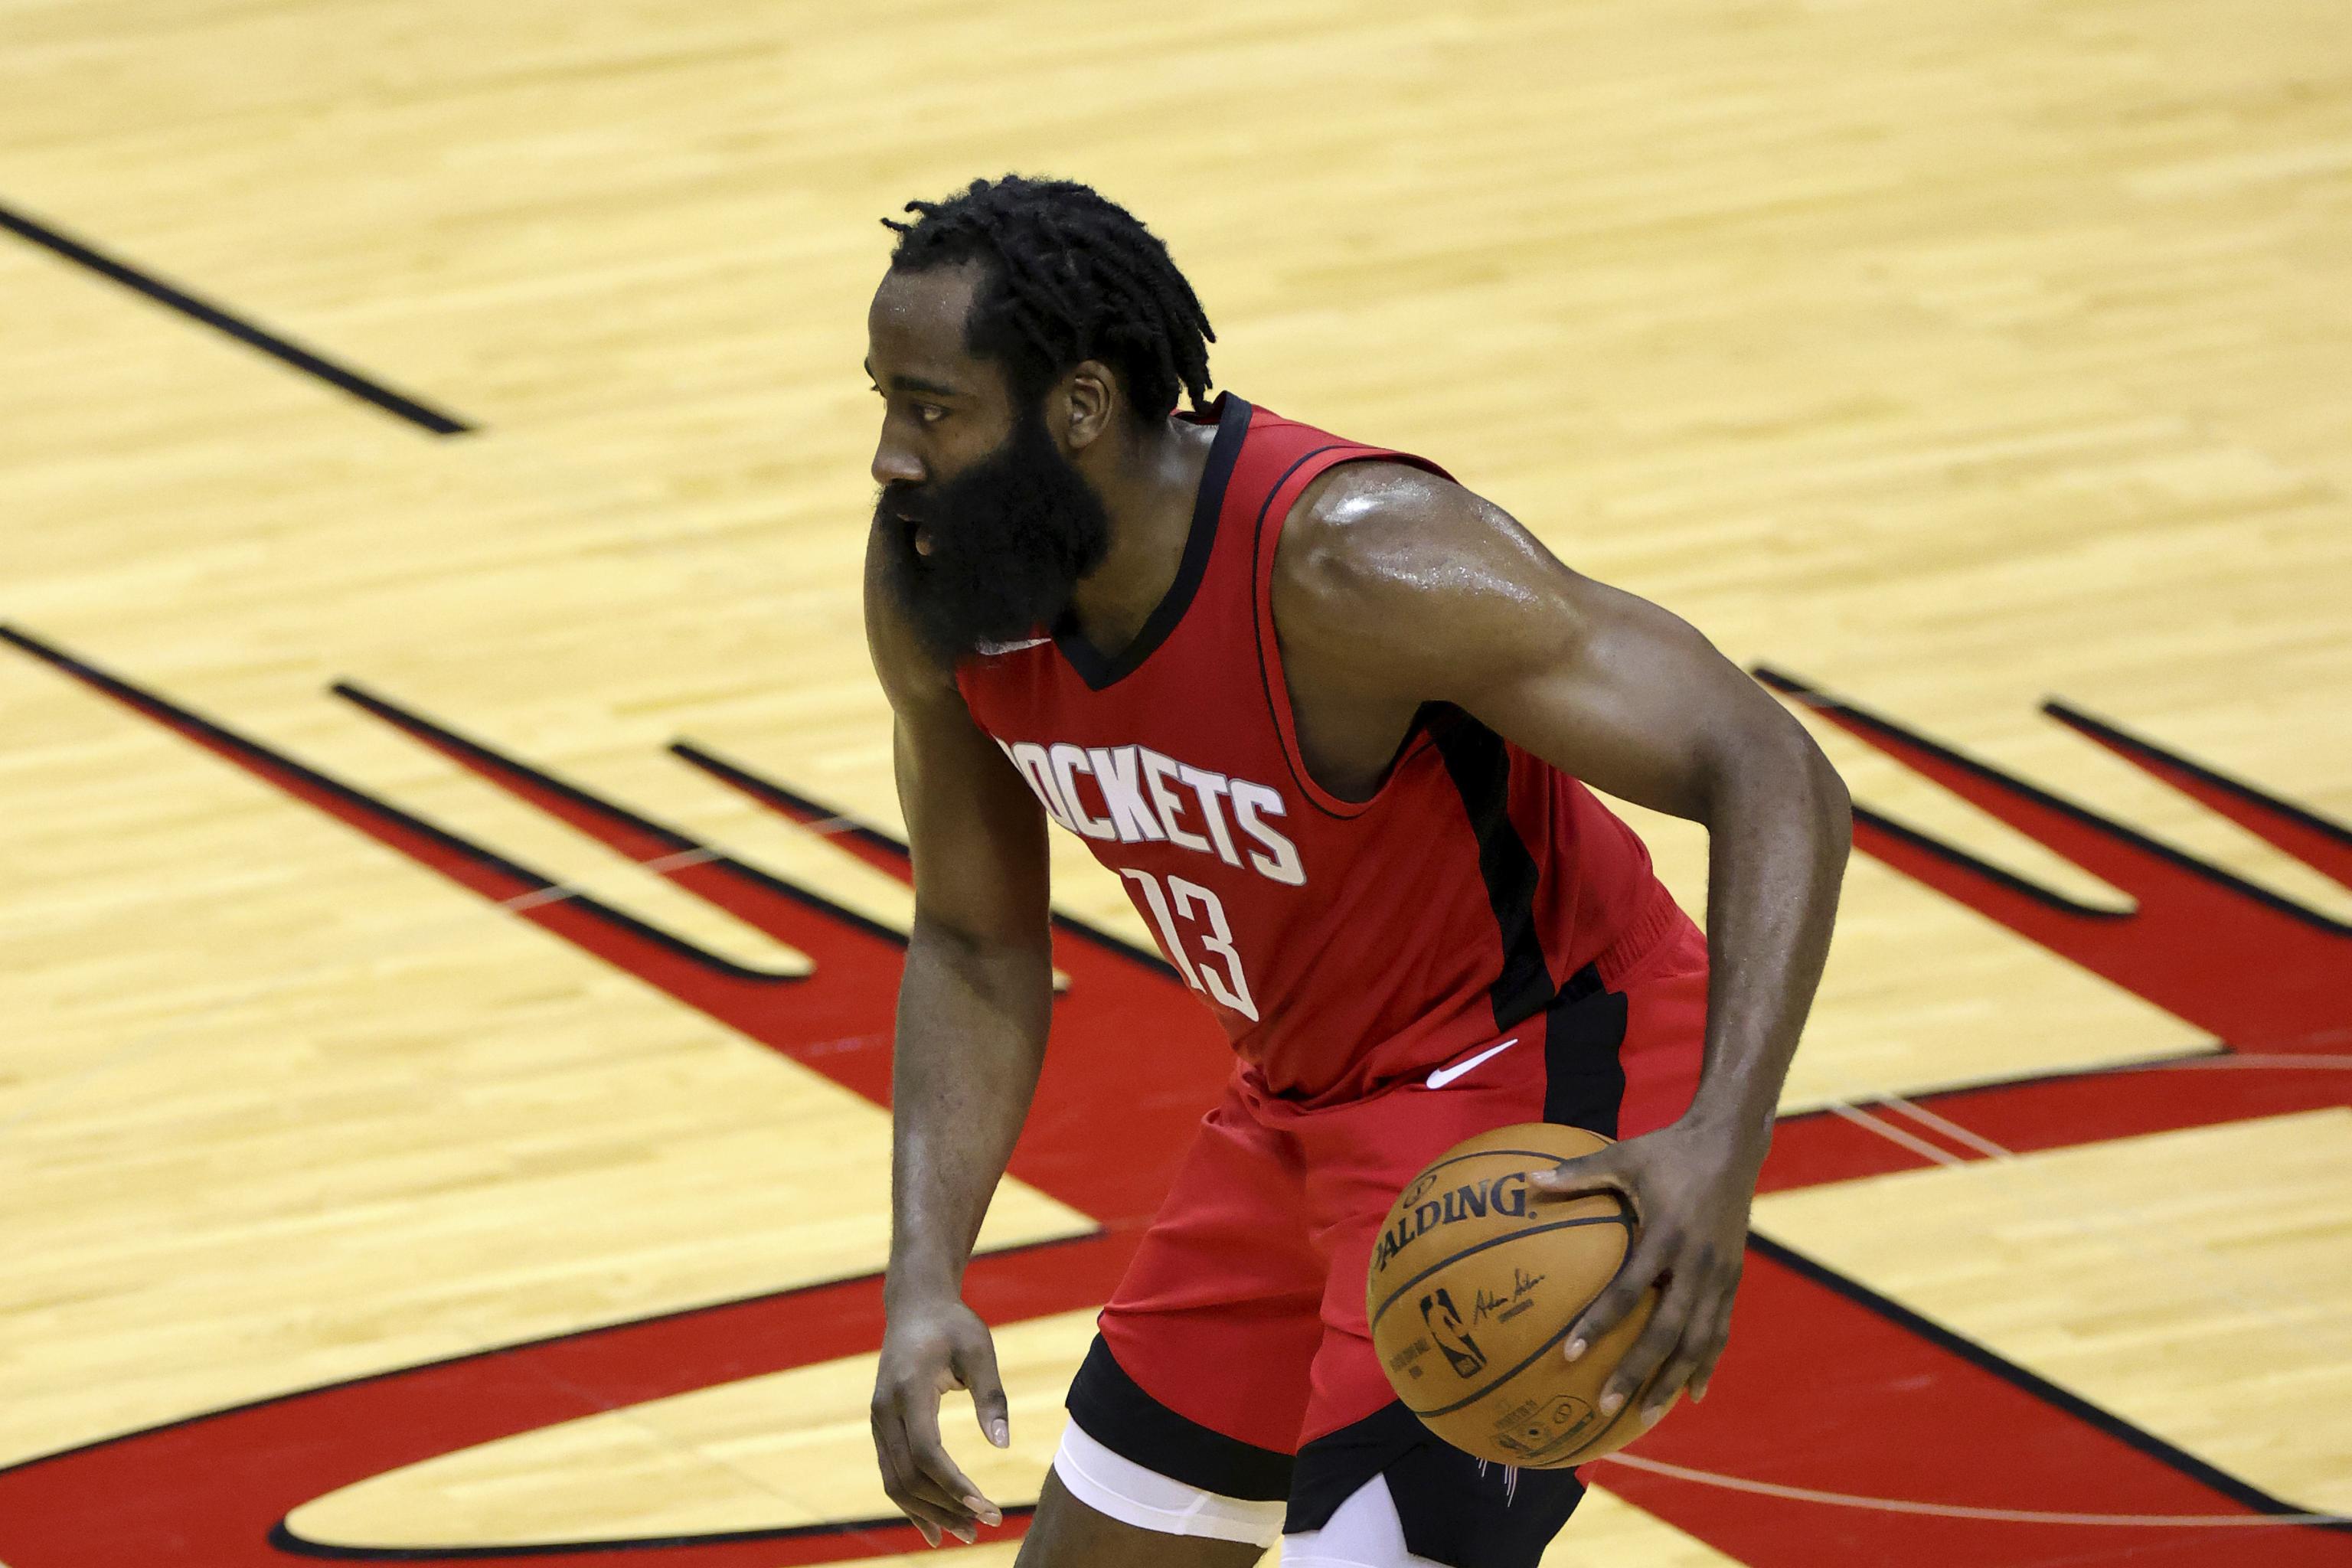 Nba Trade Rumors James Harden Has Nets As Top Team Kyrie Irving Linked To Deal Bleacher Report Latest News Videos And Highlights